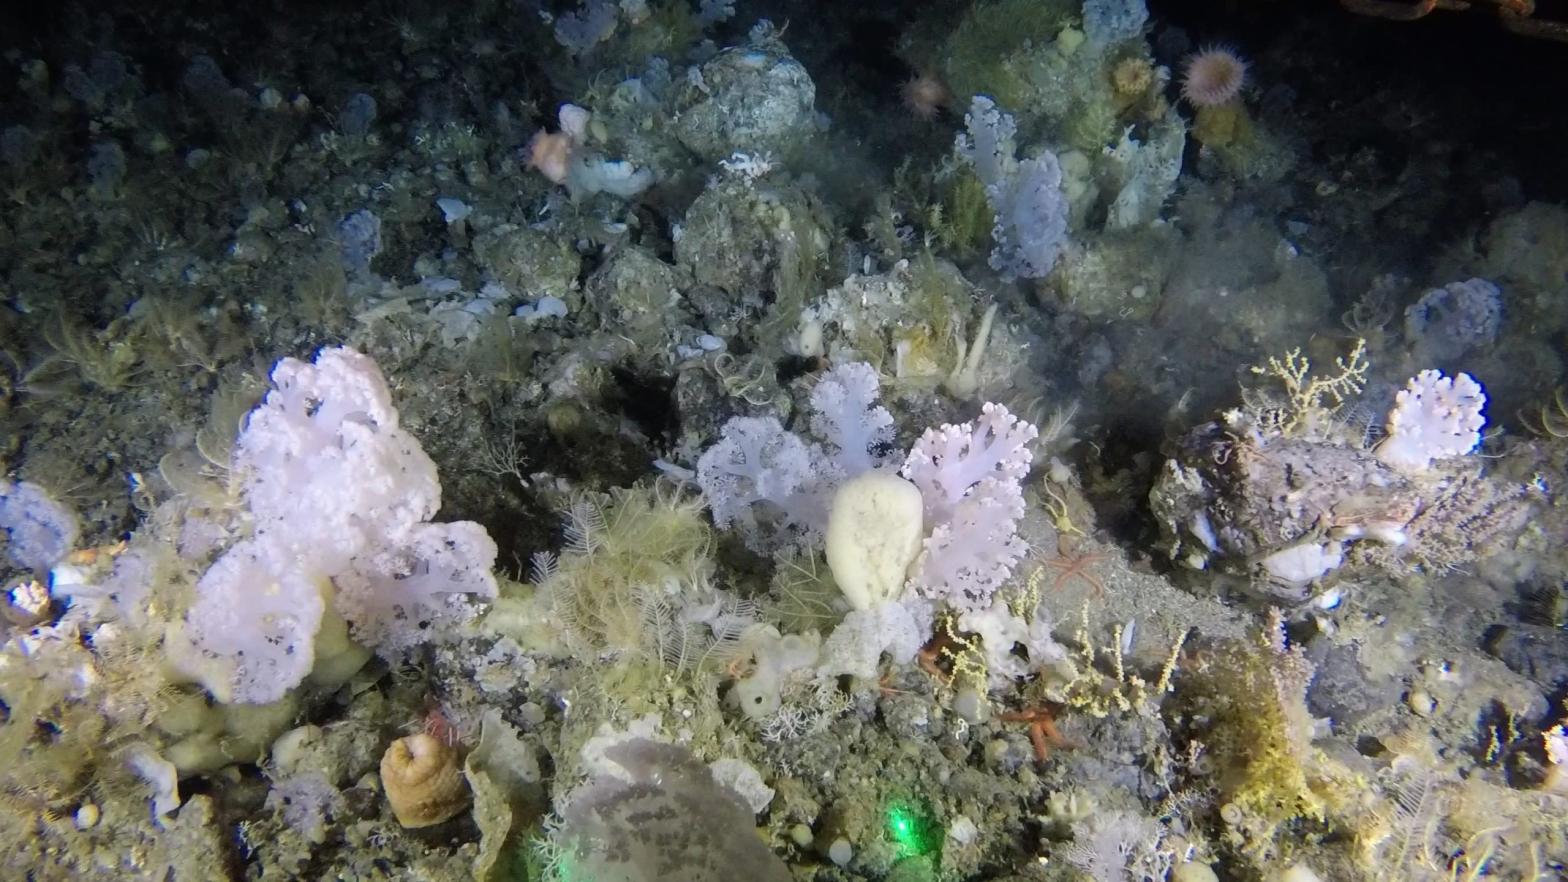 Image from benthic sled. Coral garden habitat with a high diversity of animals including sponges, anemones, and feather stars (Photo: ZSL/GINR)